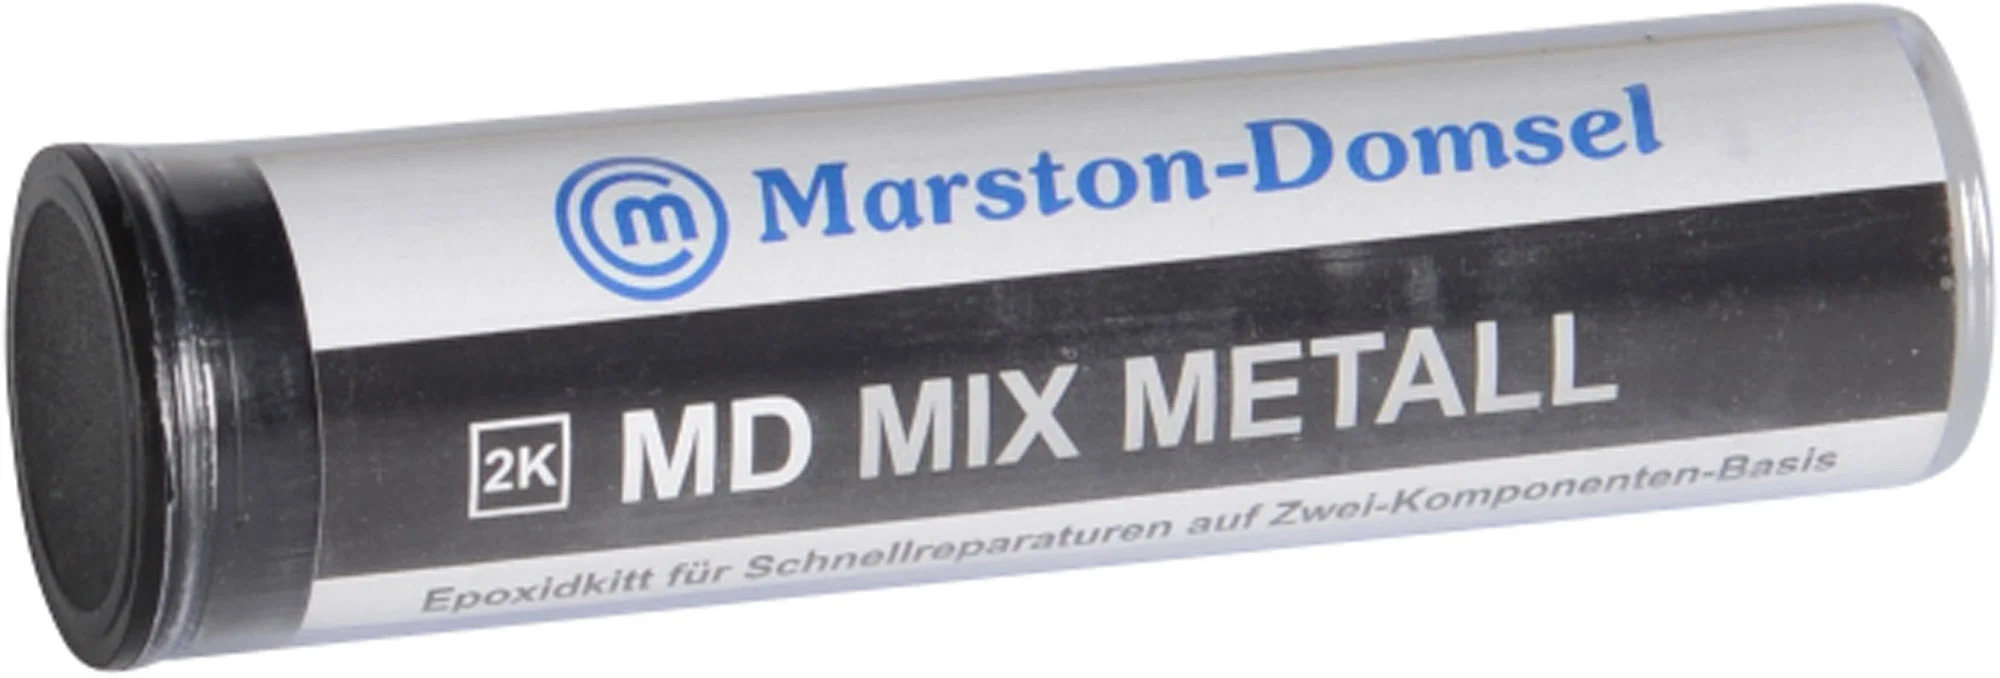 MD-MIX METALL